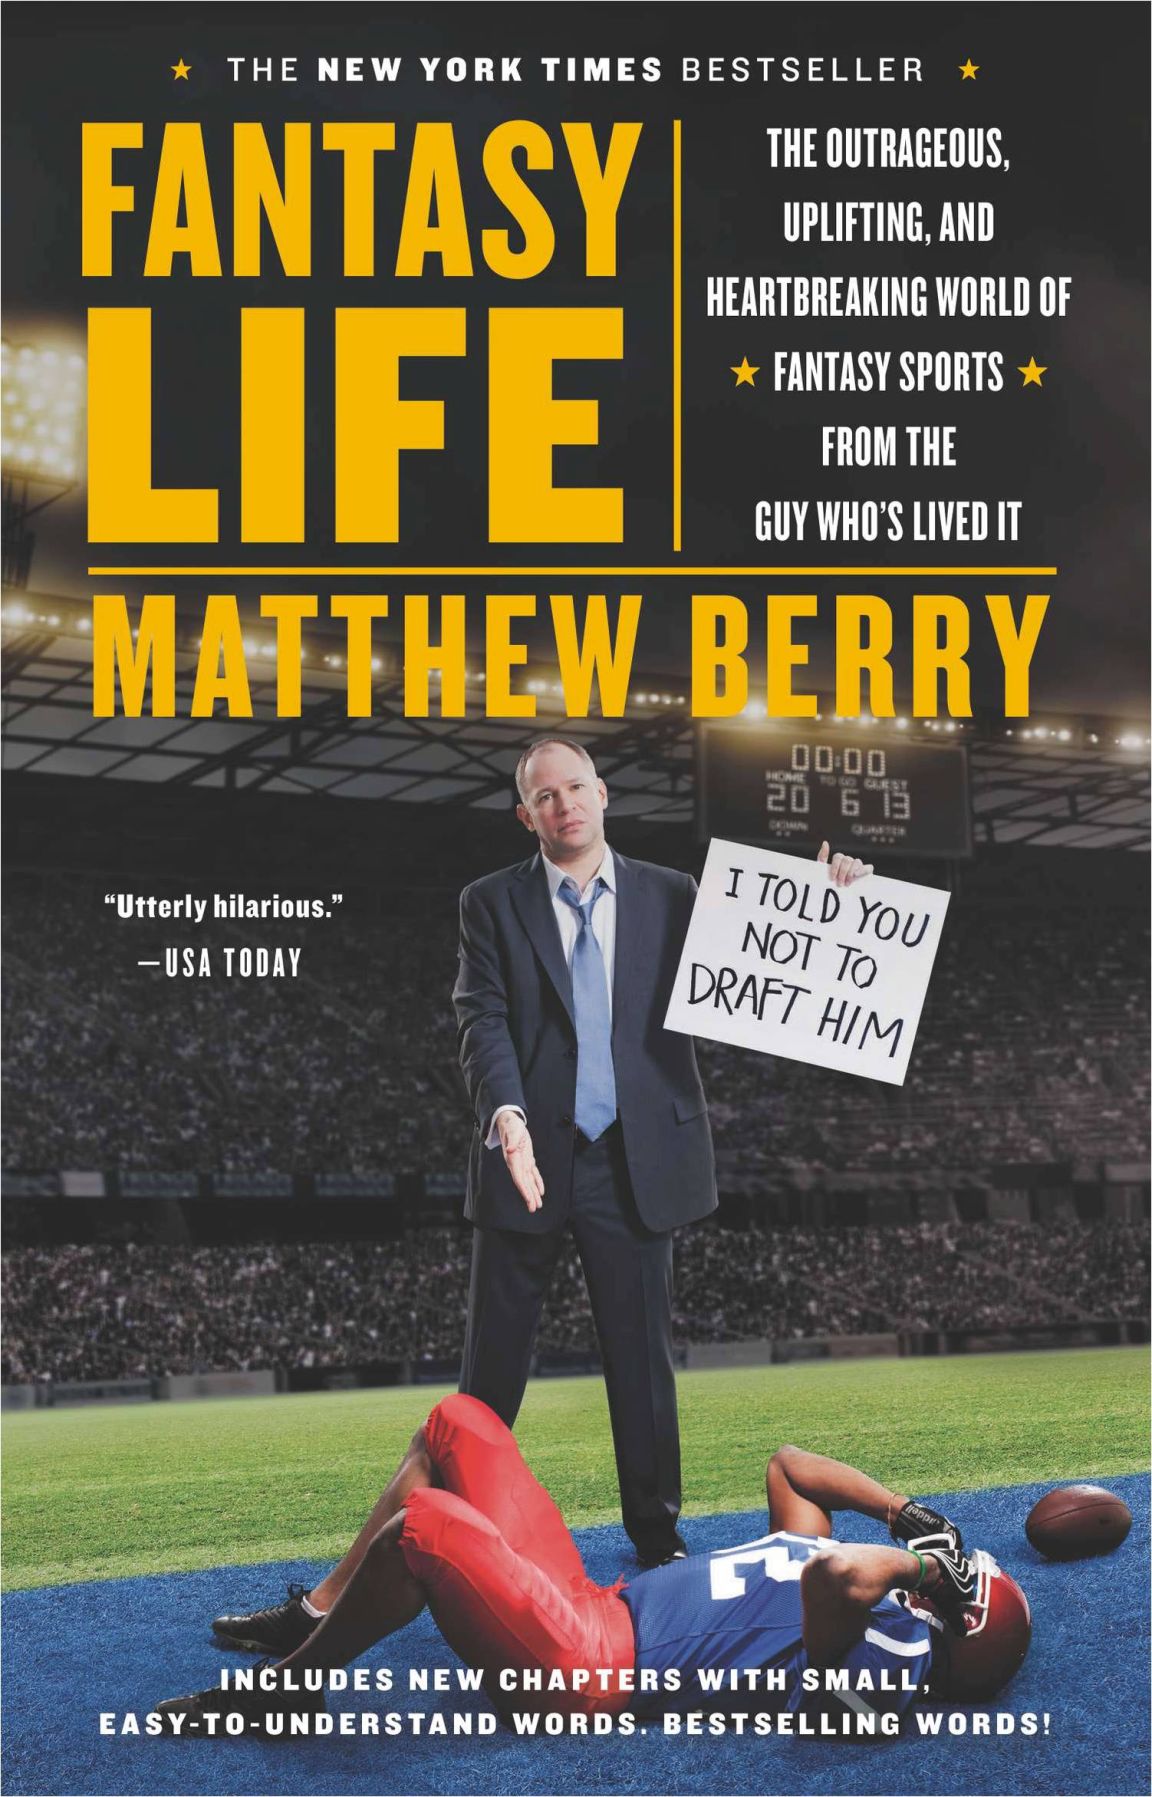 ESPN fantasy football analyst Matthew Berry will be at the Alden to